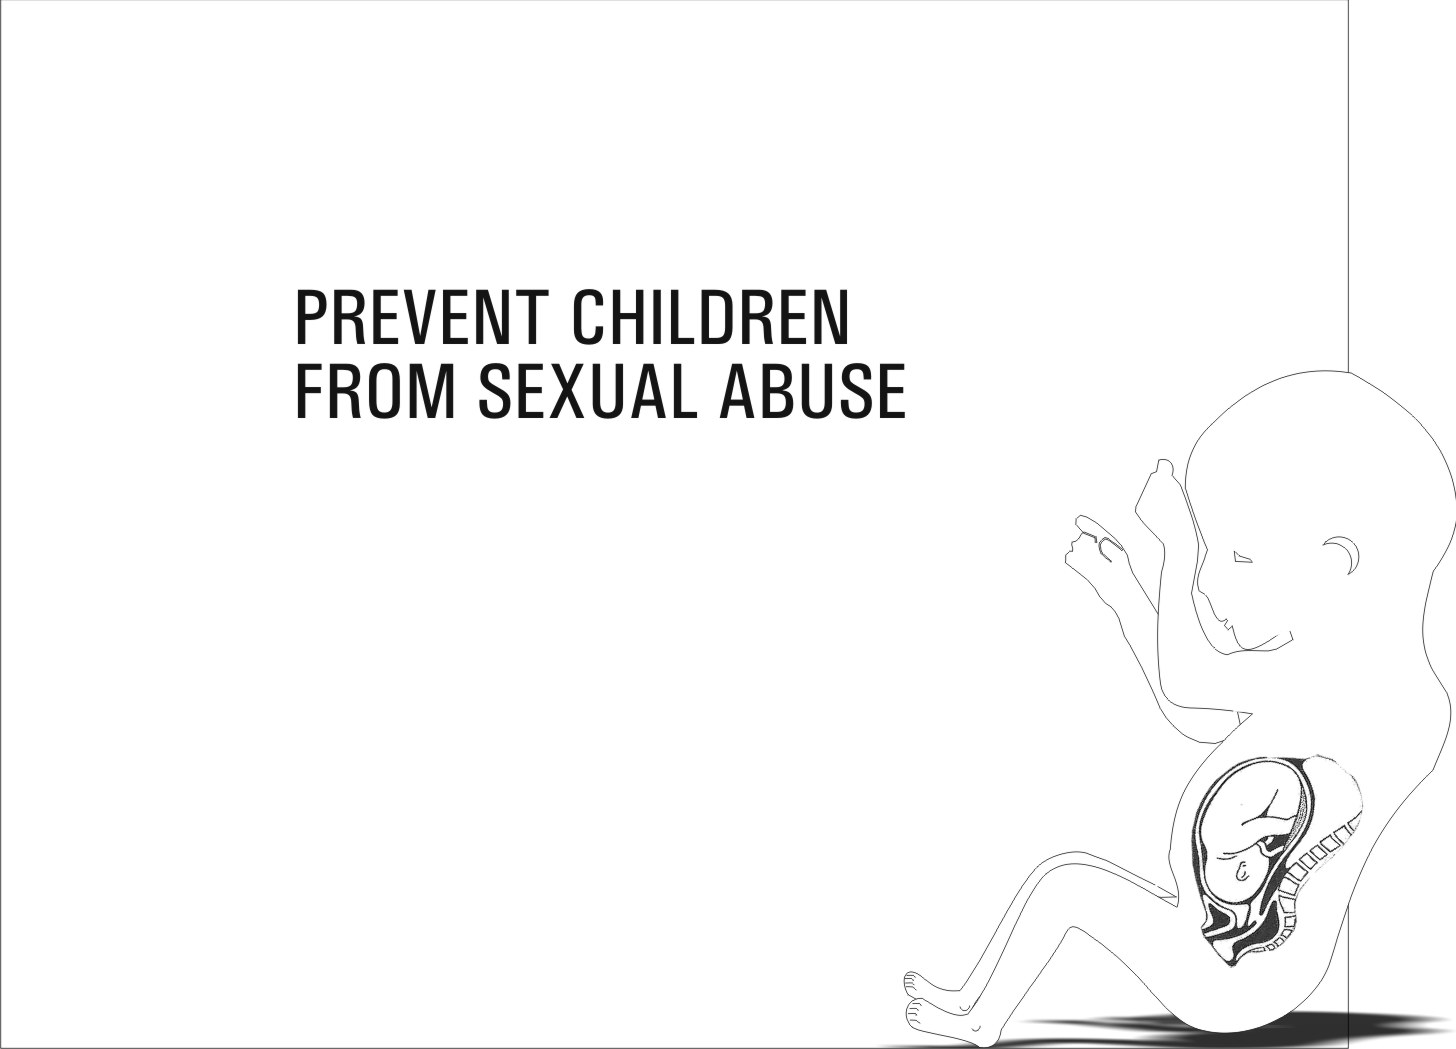 [Prevent+children+from+sexual+abuse.jpg]